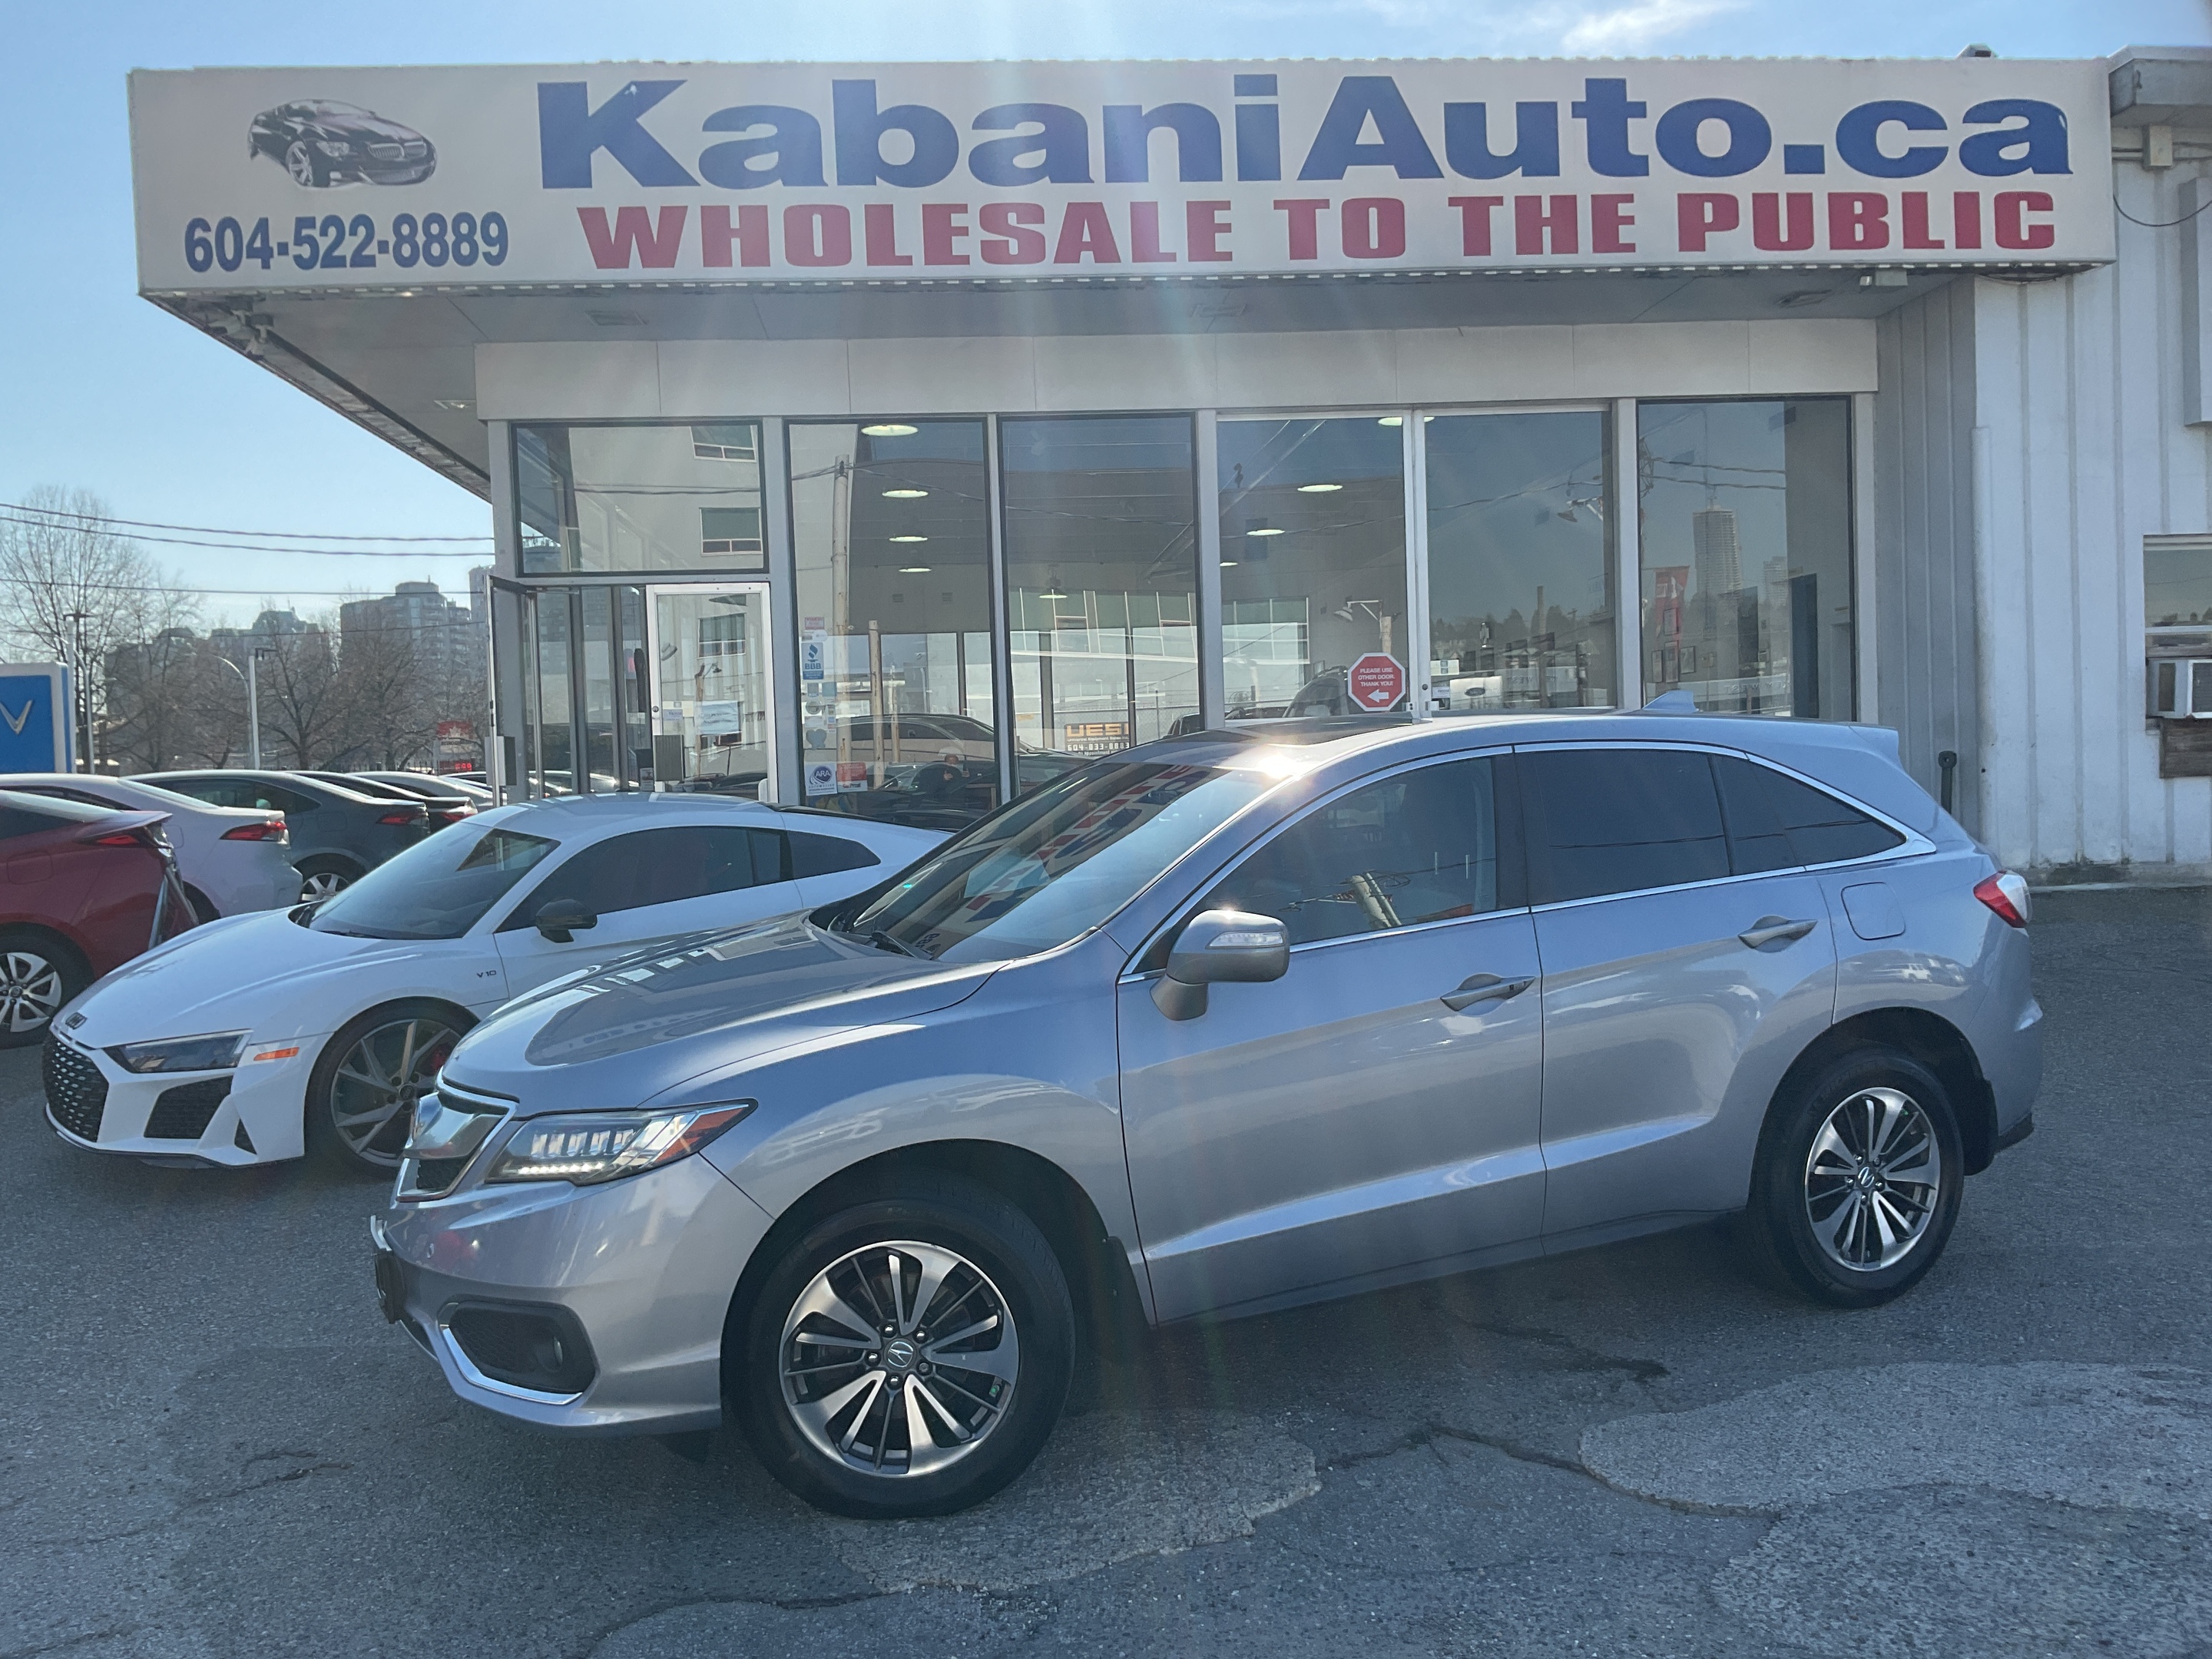 2016 Acura RDX SOLD - SOLD